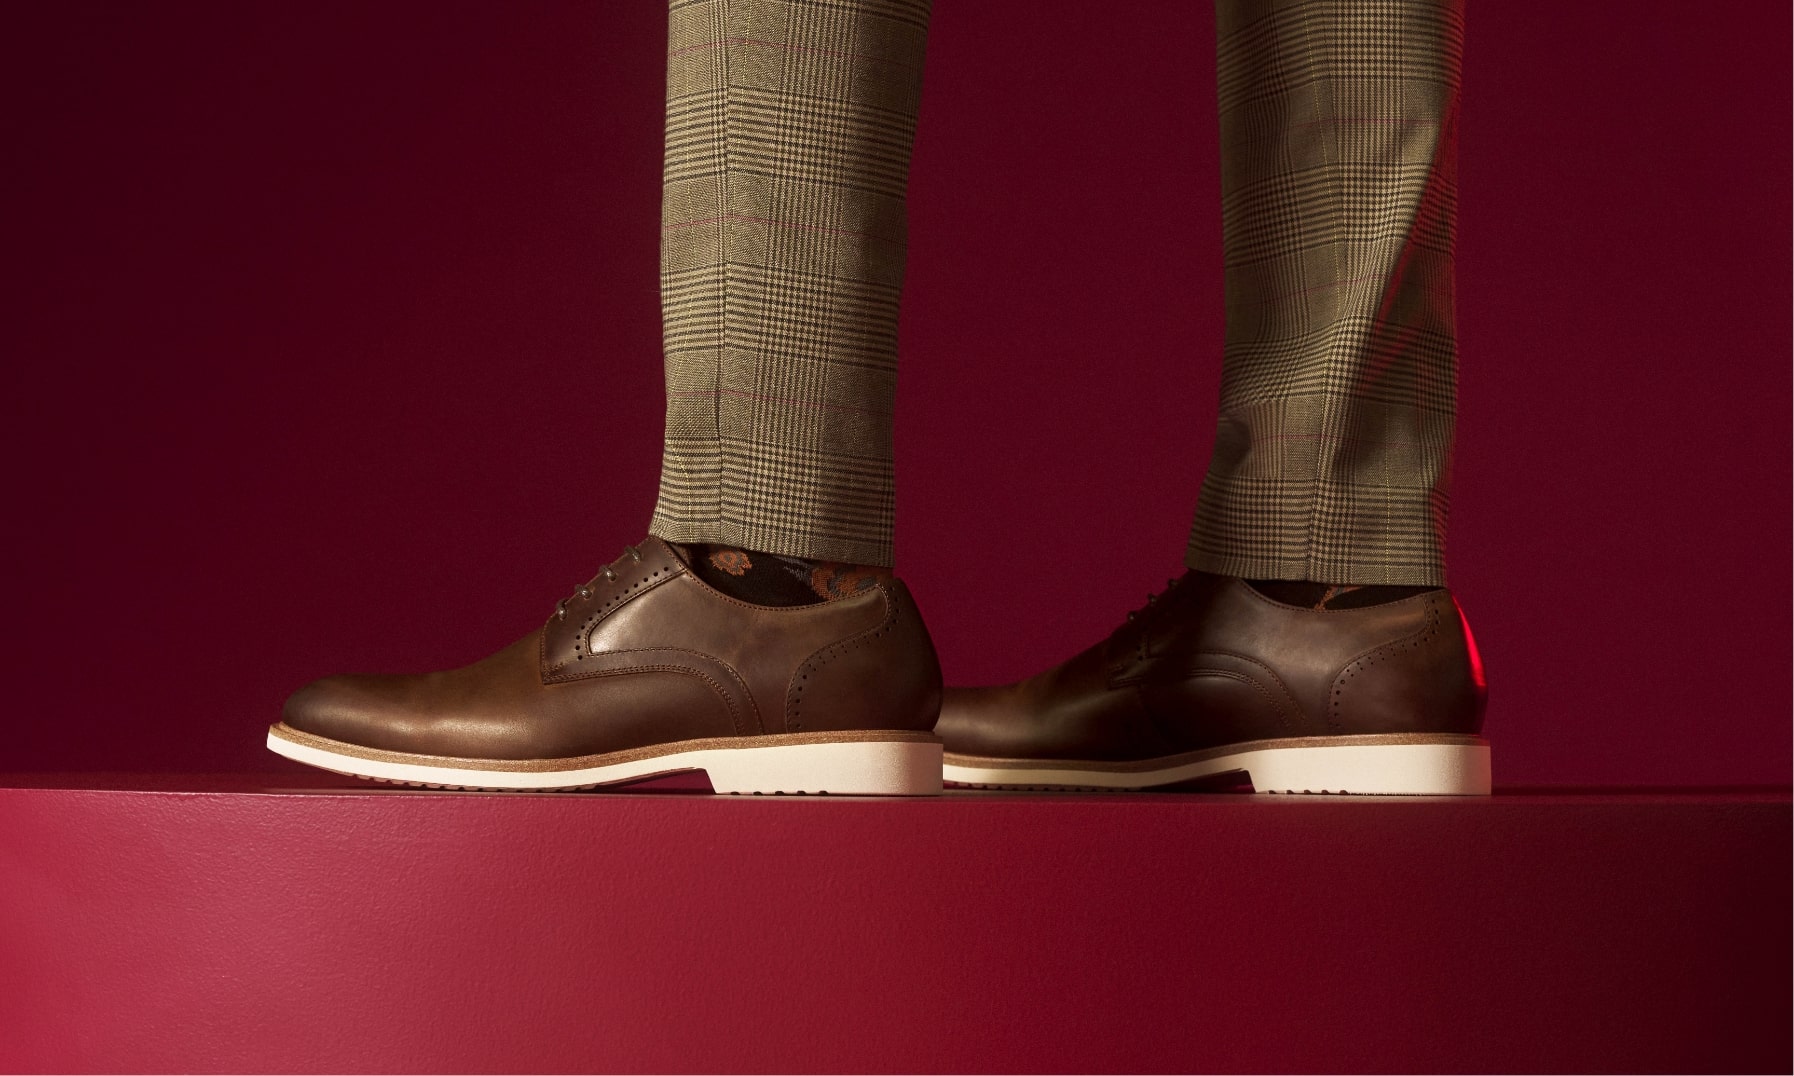 Stacy Adams casuals featuring the Wescott in brown.